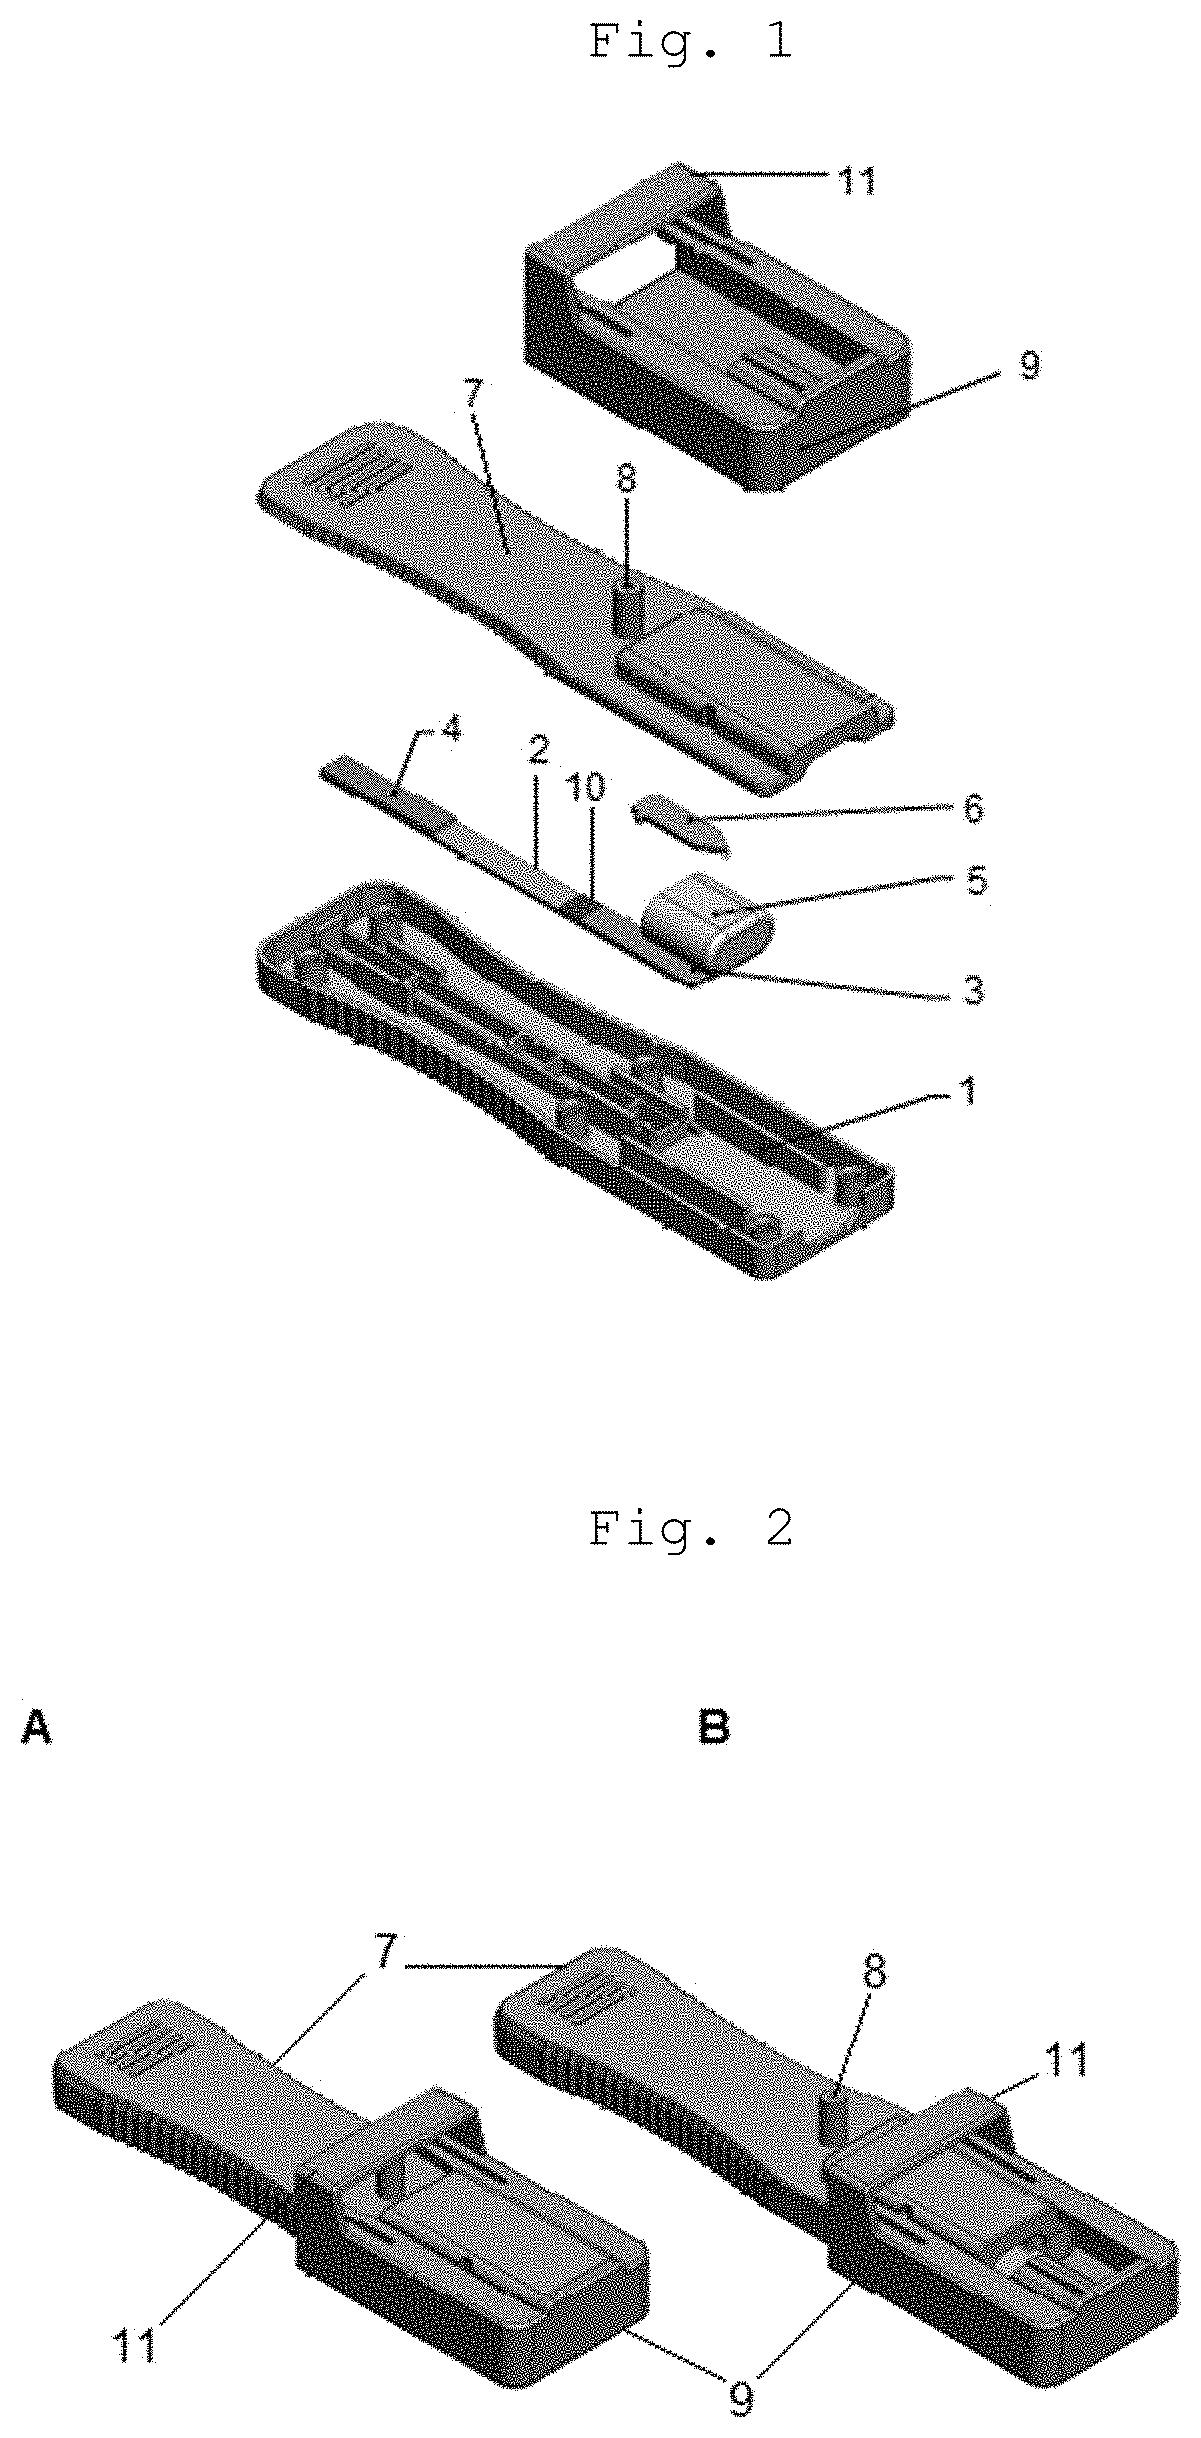 Cassette device for quick test of diagnosis, method for detecting a ligand in a biological sample and kit